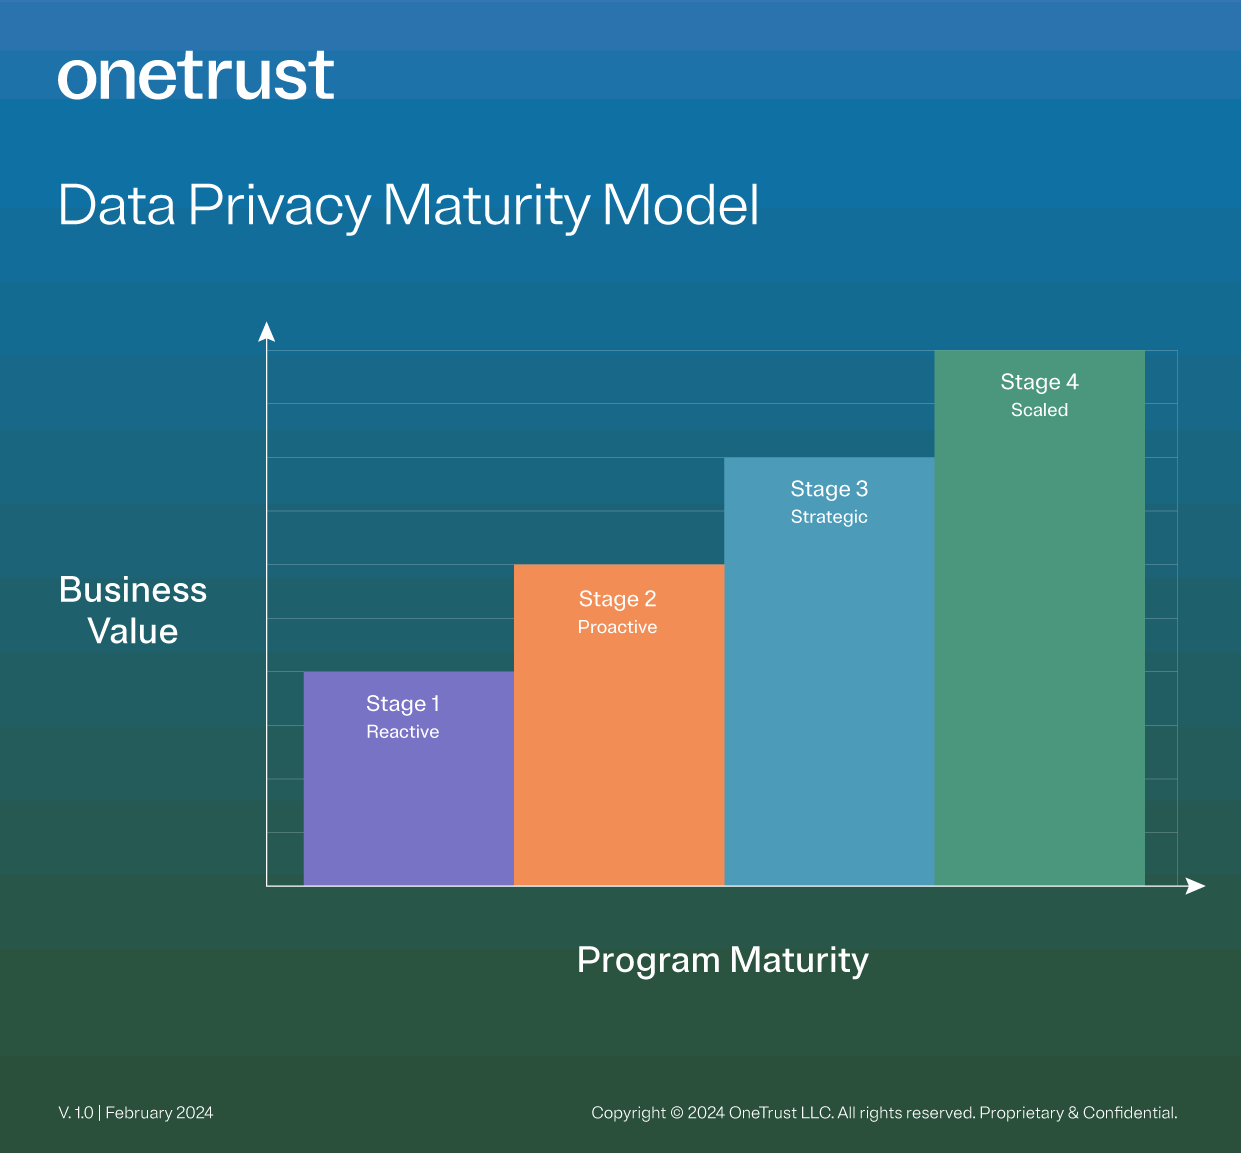 Bar graph showing the four stages of the data privacy maturity model and their business value.